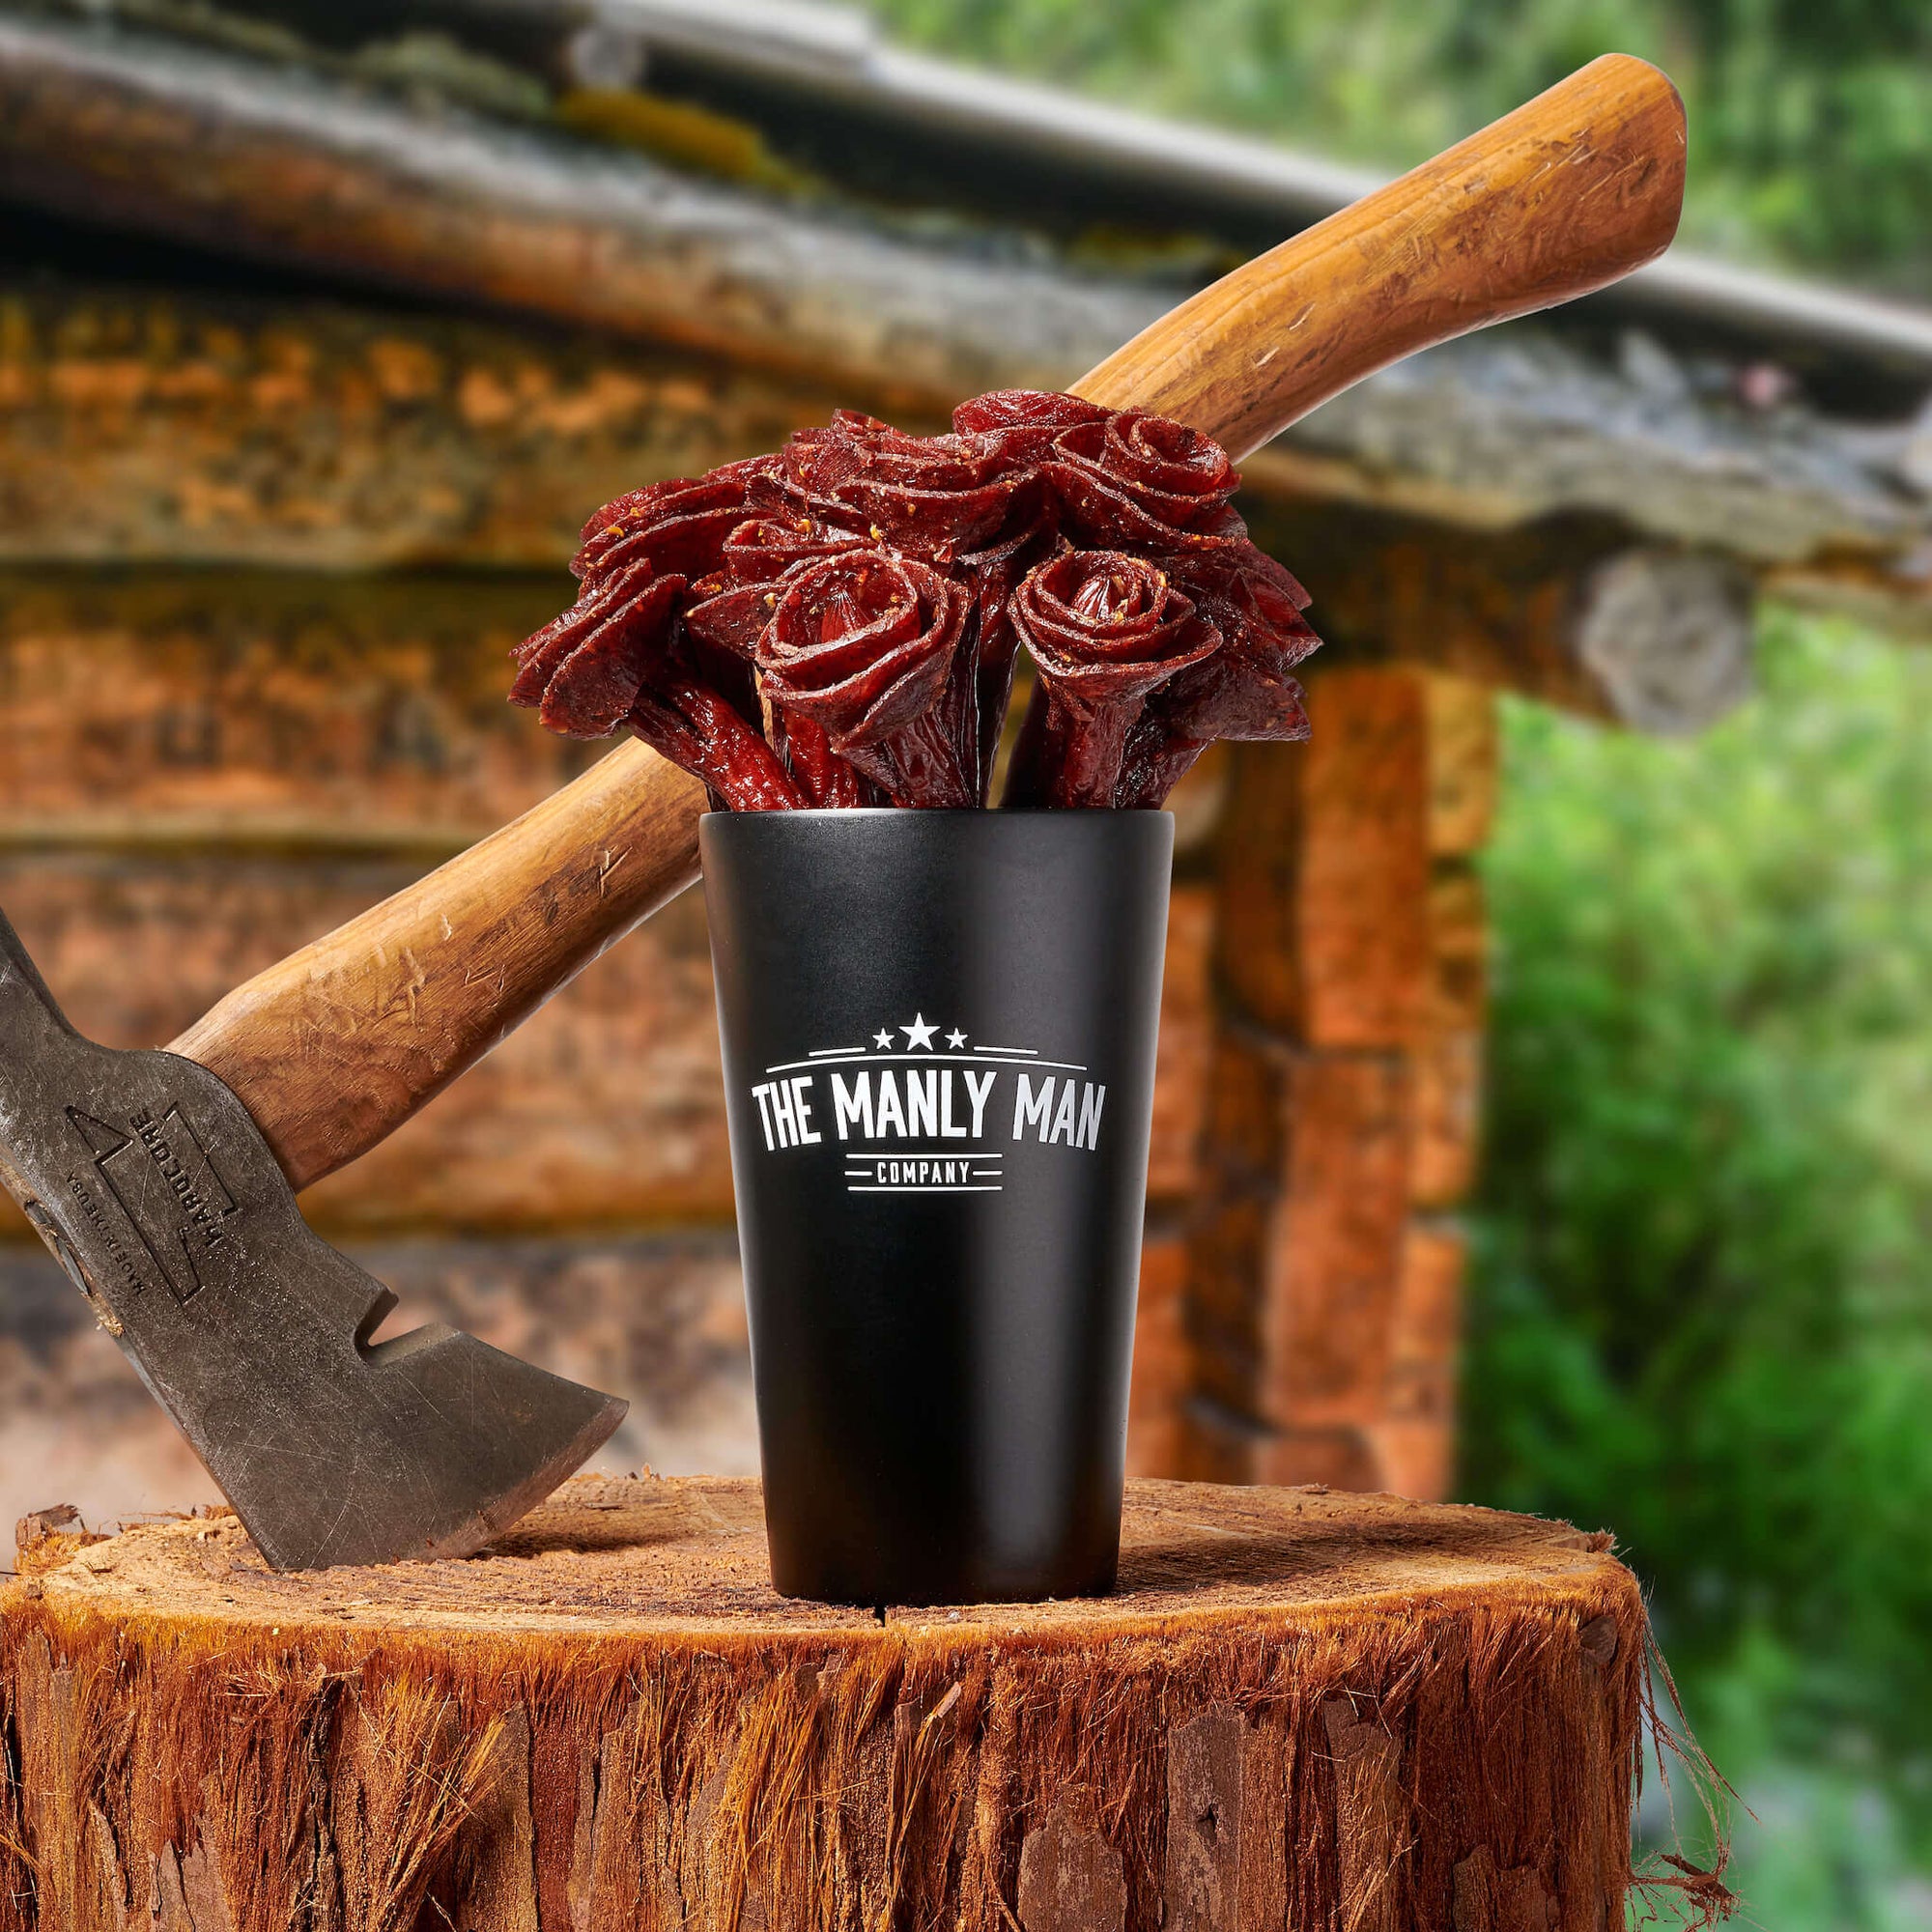 Beef jerky rose bouquet in Black Steel pint glass "vase" and hatchet on upright log, in front of cabin